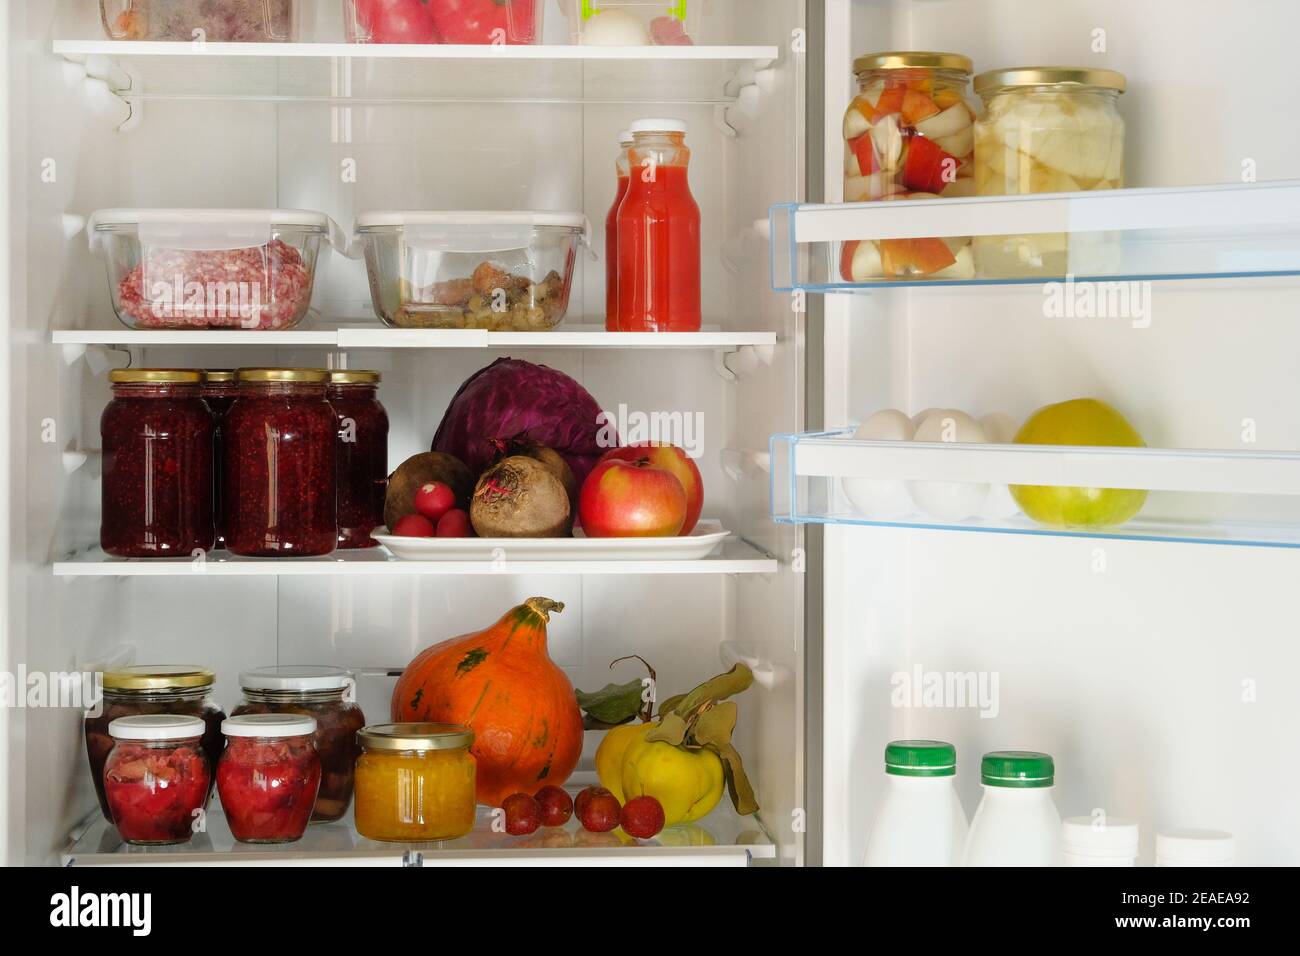 Jars with homemade fruit and berry jams, juices and other products on shelf in fridge. Fermented healthy foods stand in refrigerator. Stock Photo